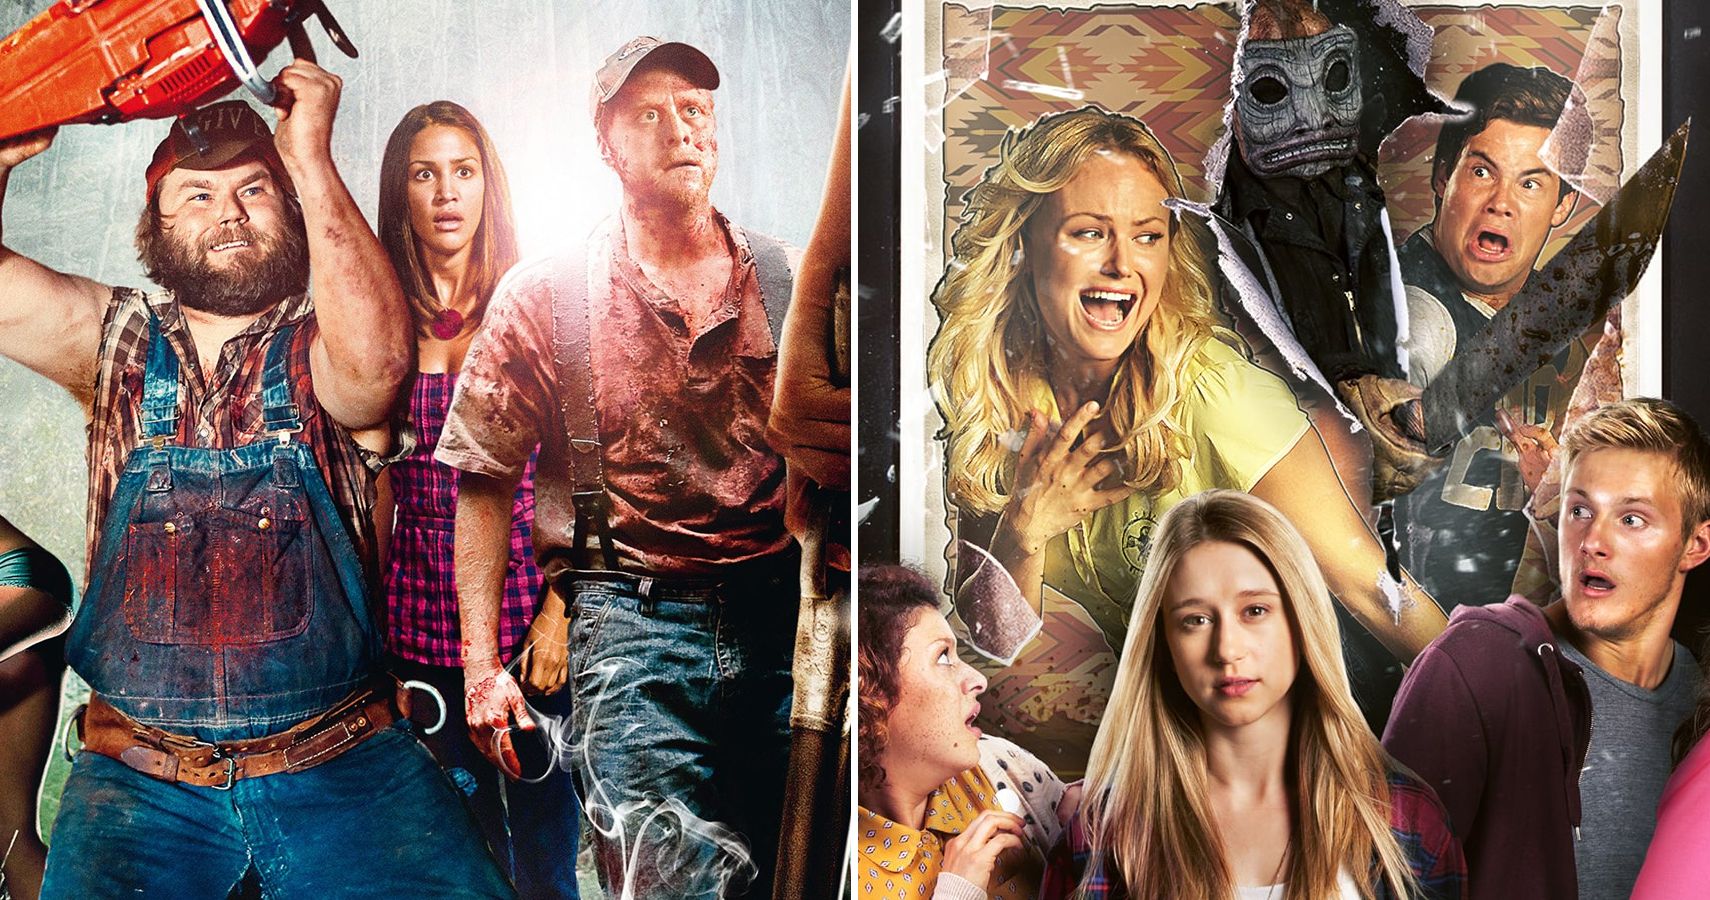 Zombieland: One of the best action-comedies of the noughties comes